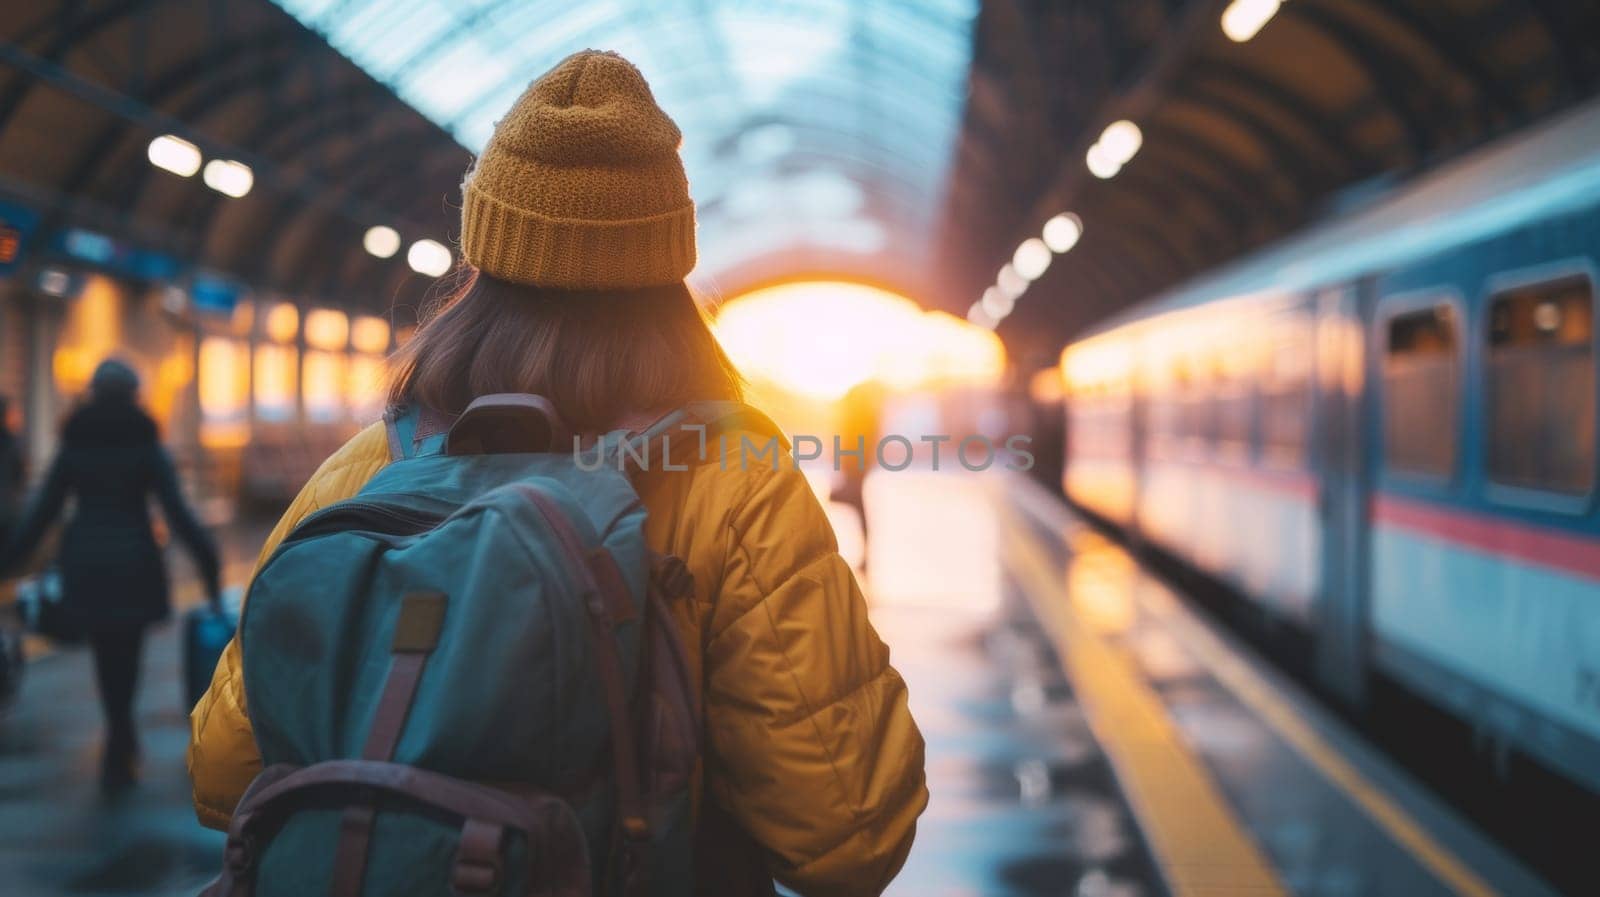 A woman with a backpack standing in front of train, AI by starush